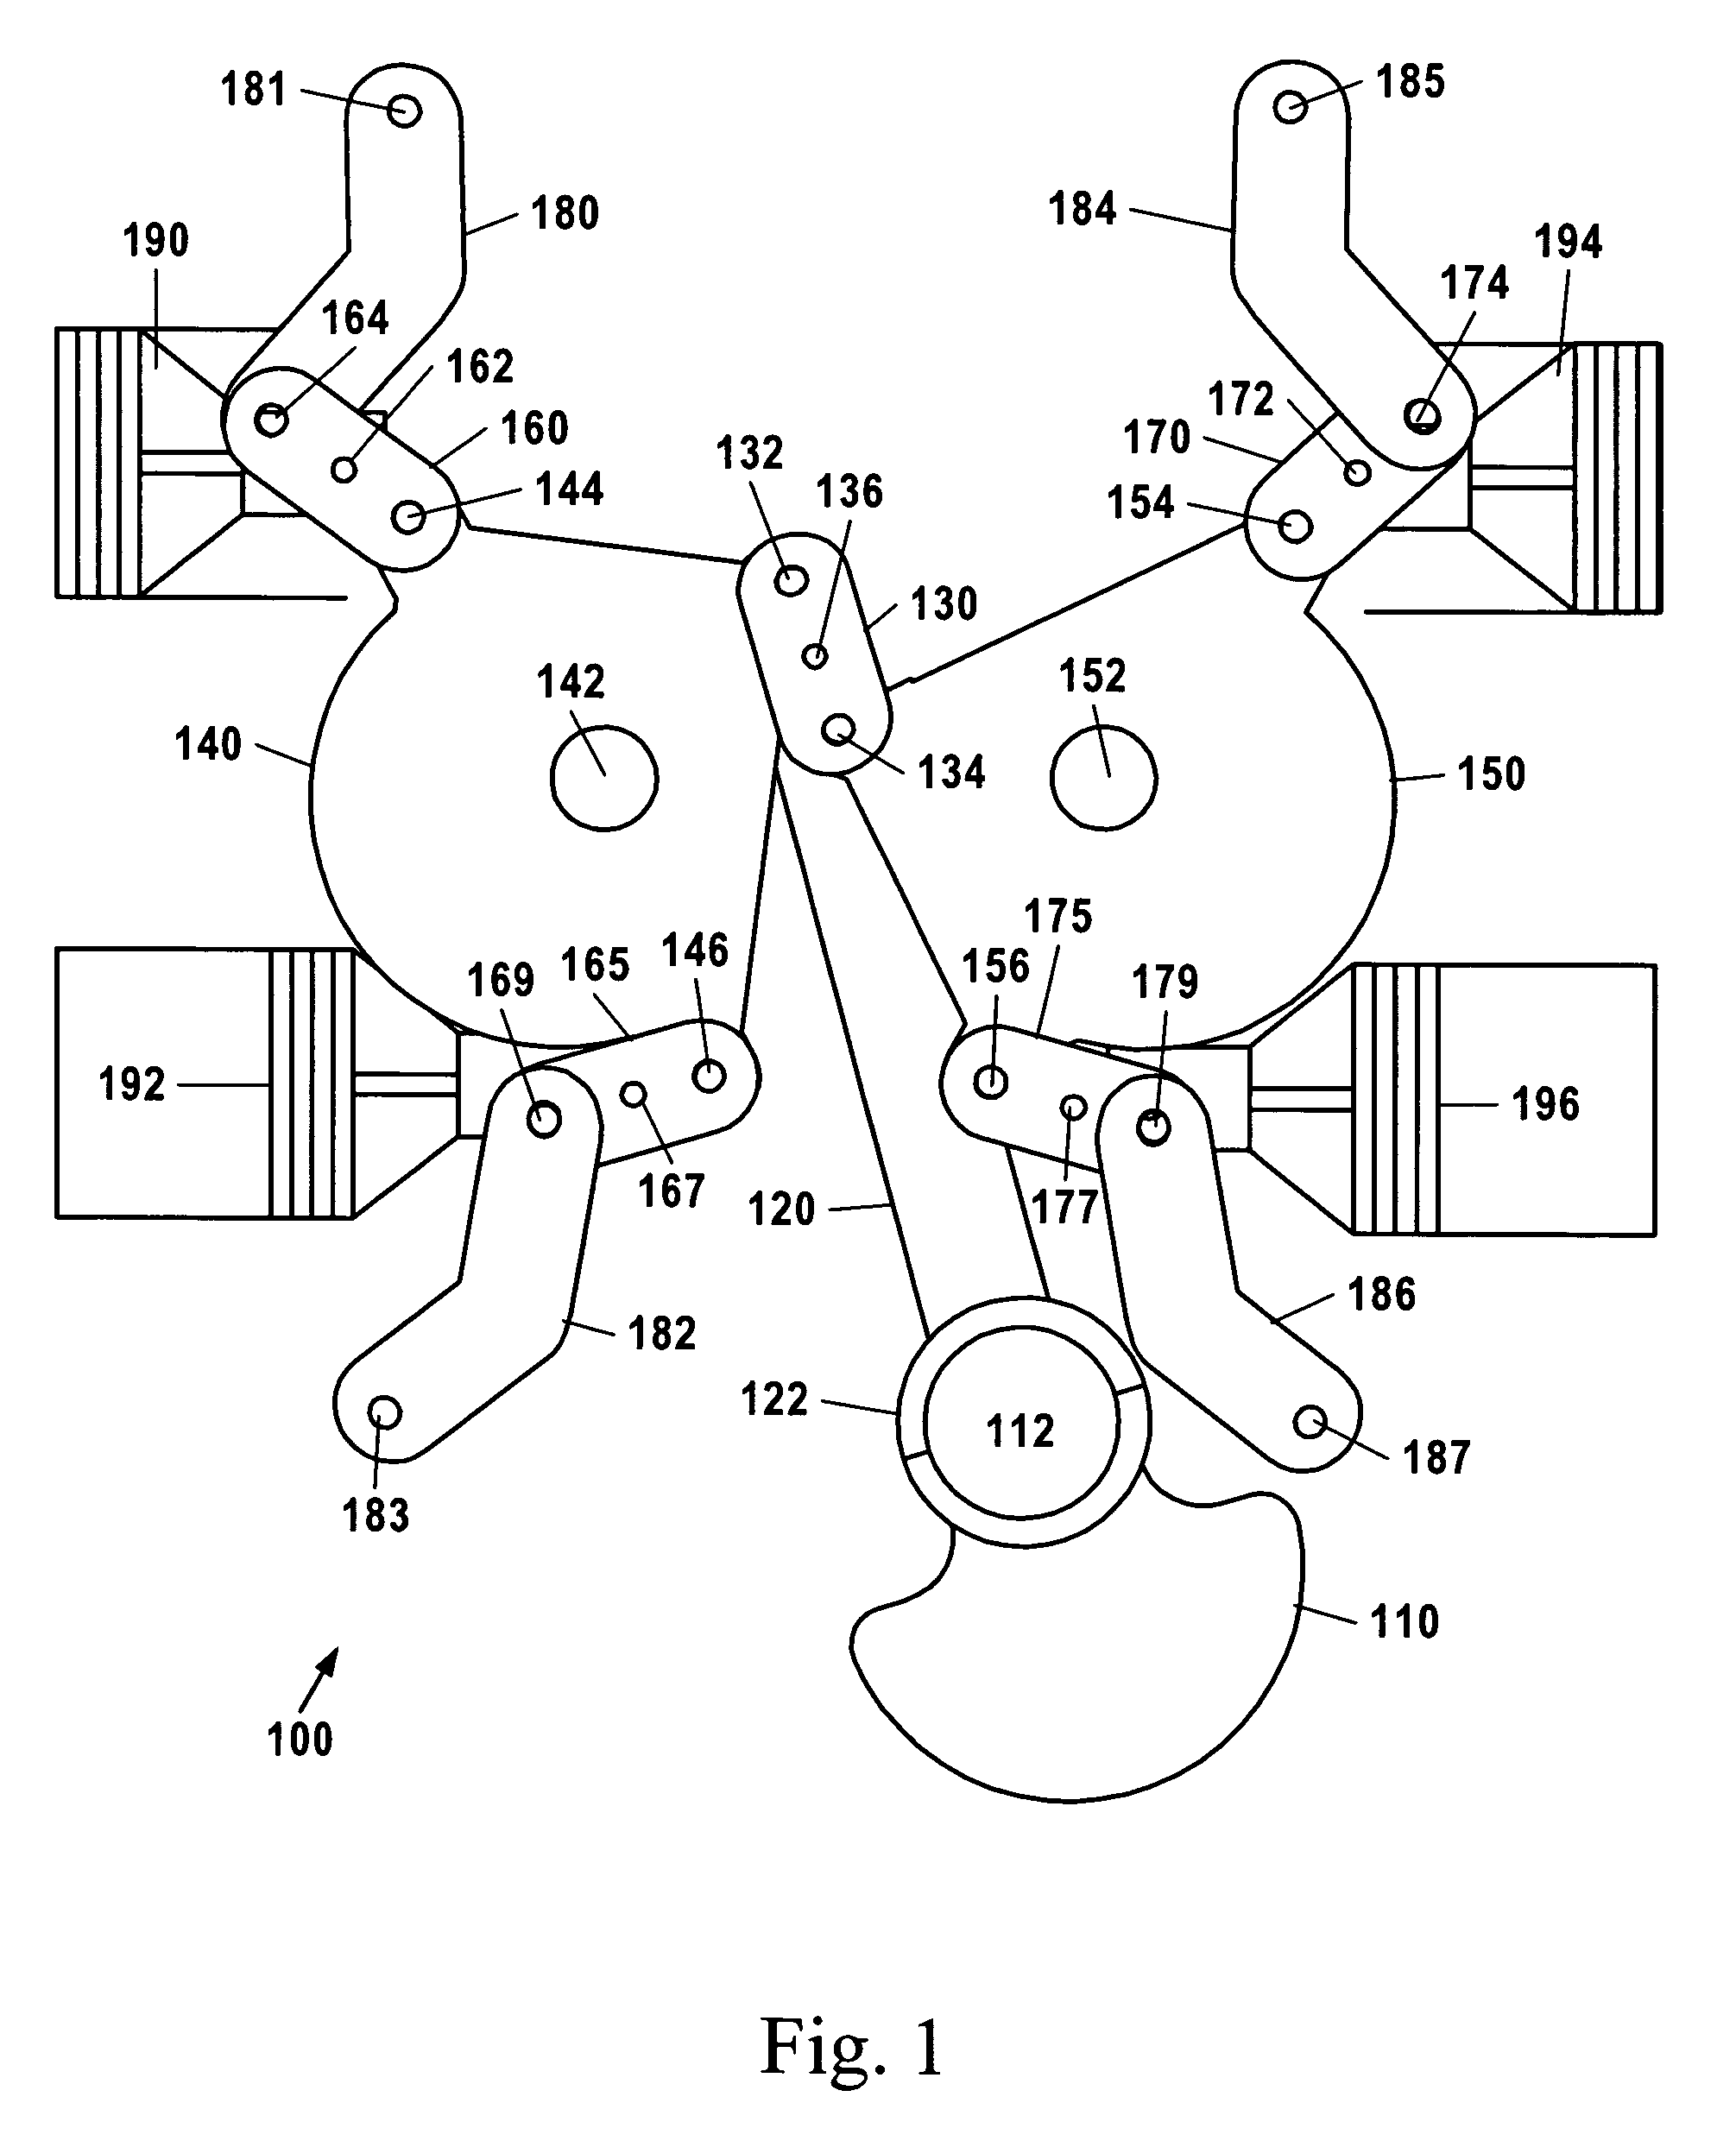 Force transfer mechanism for an engine